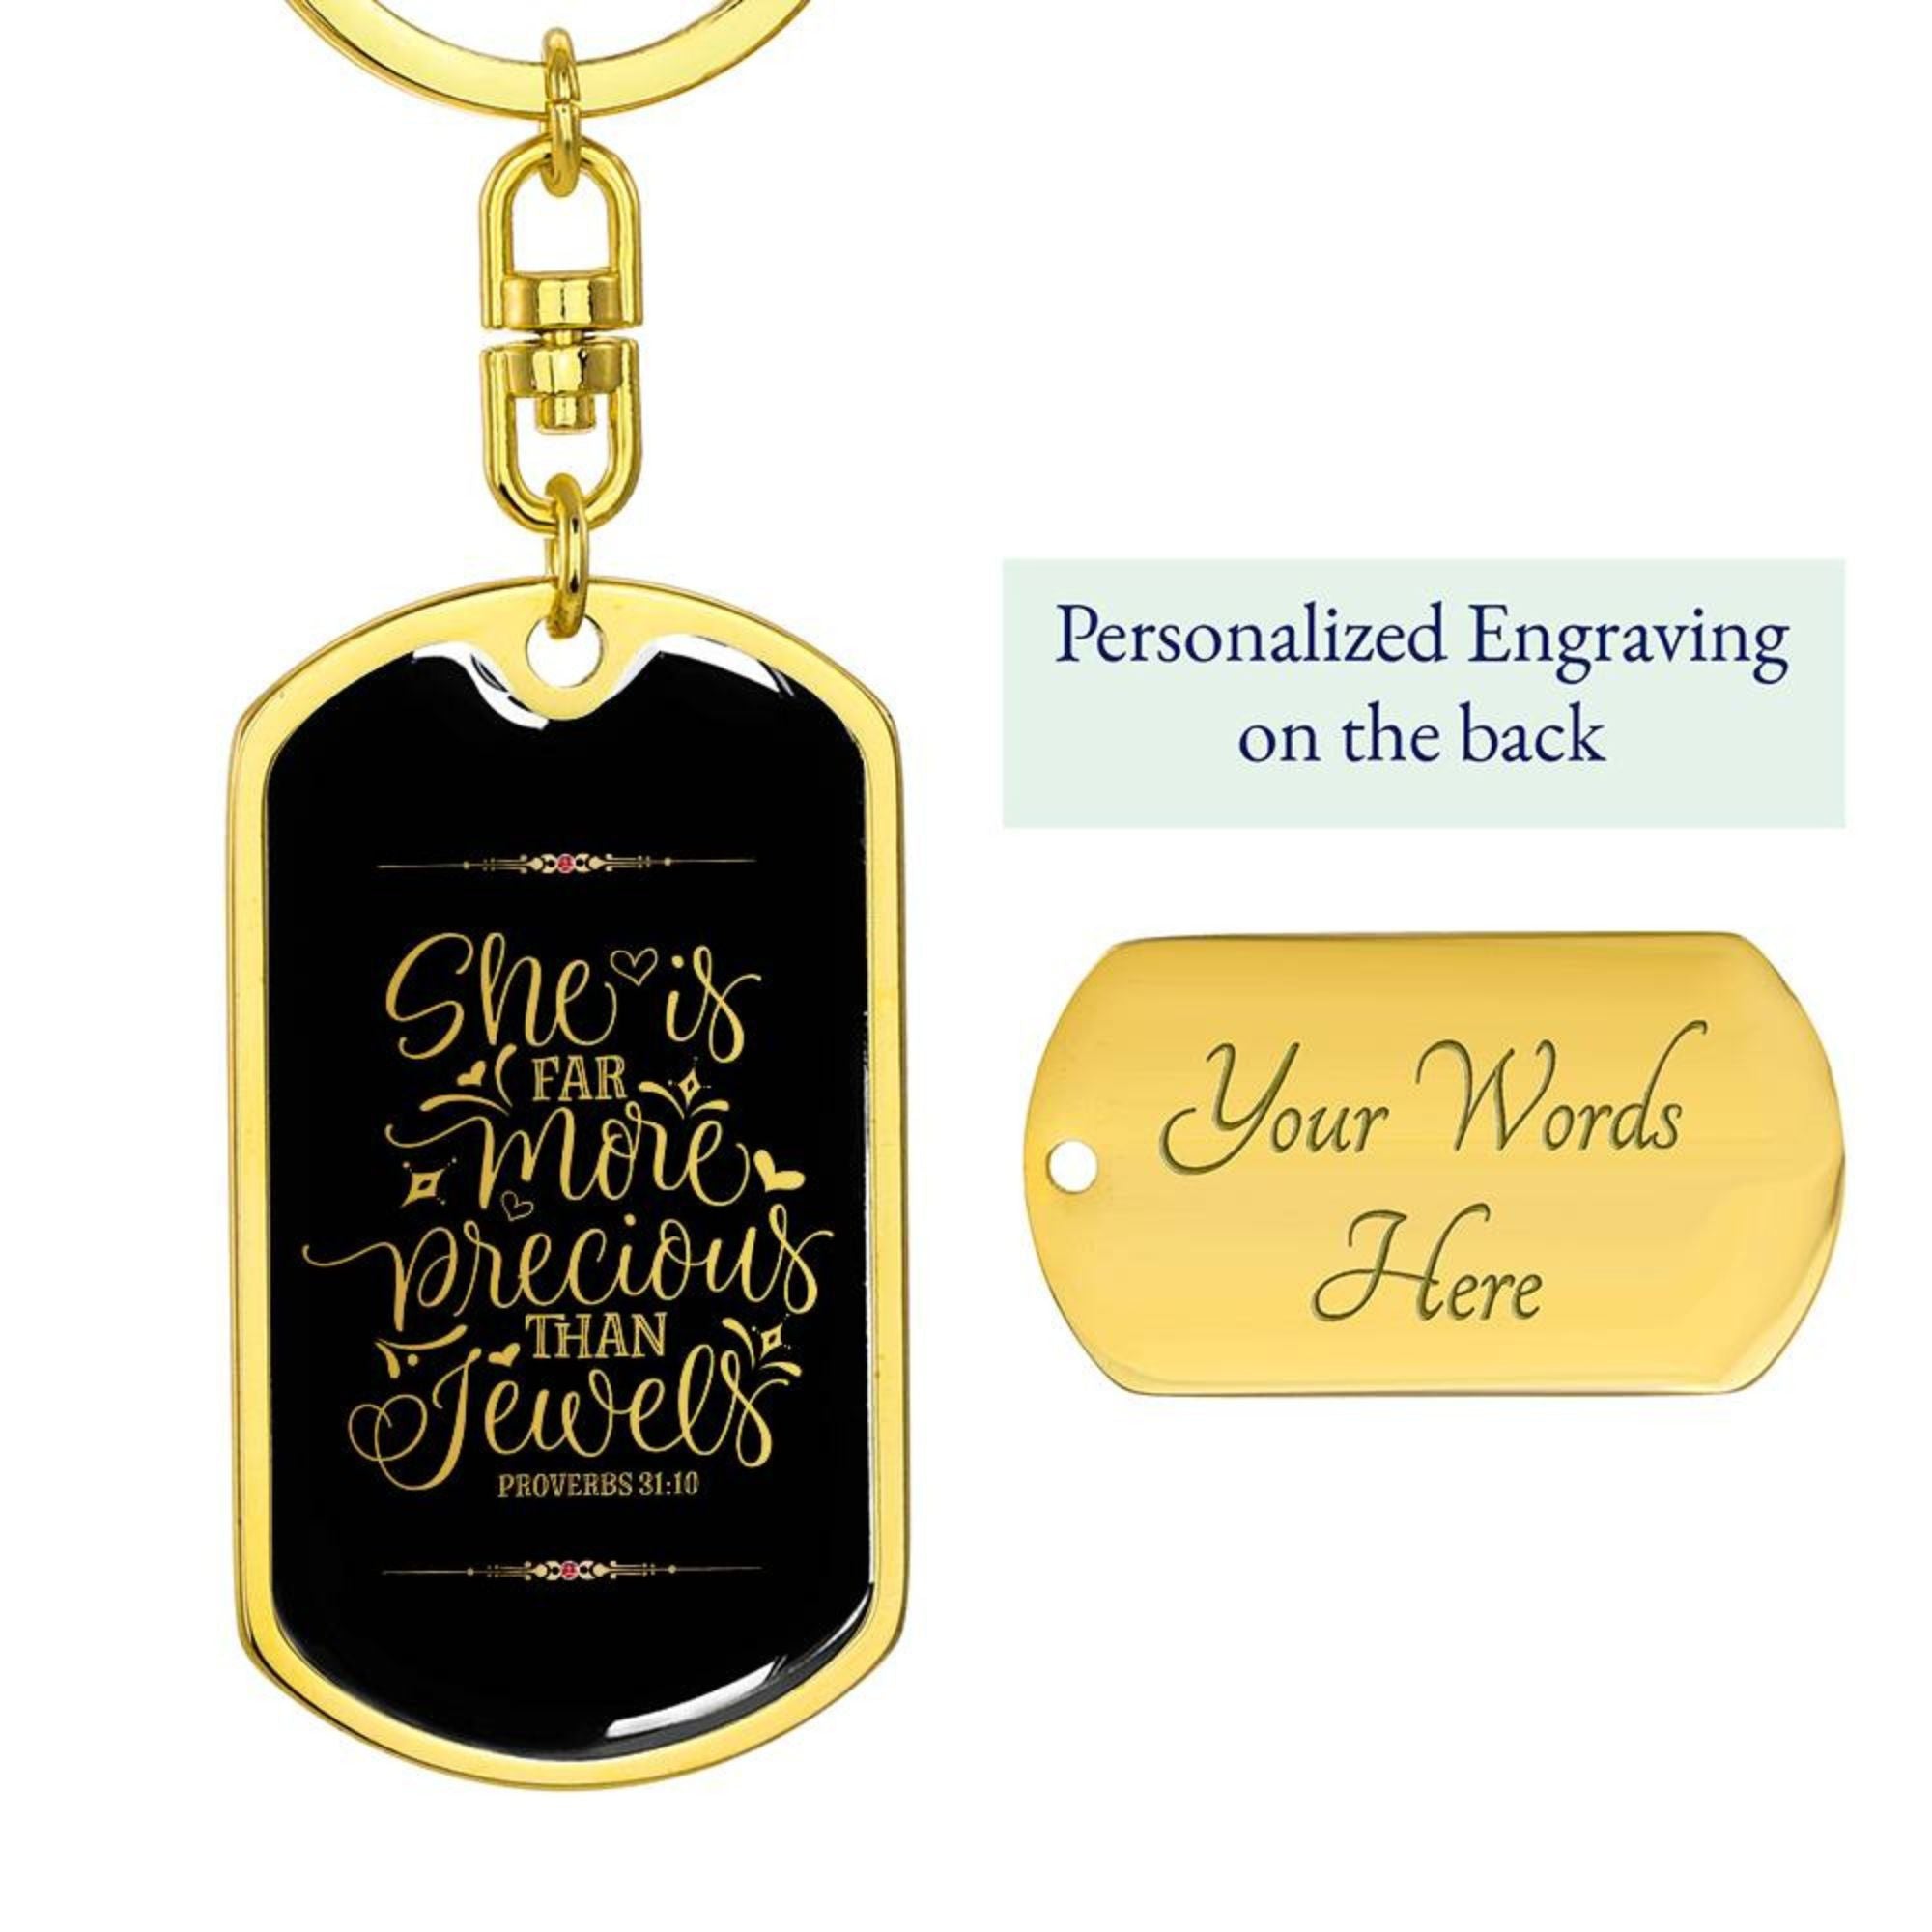 She is Far More Precious - Gold Dog Tag with Swivel Keychain Engraving: Yes Jesus Passion Apparel